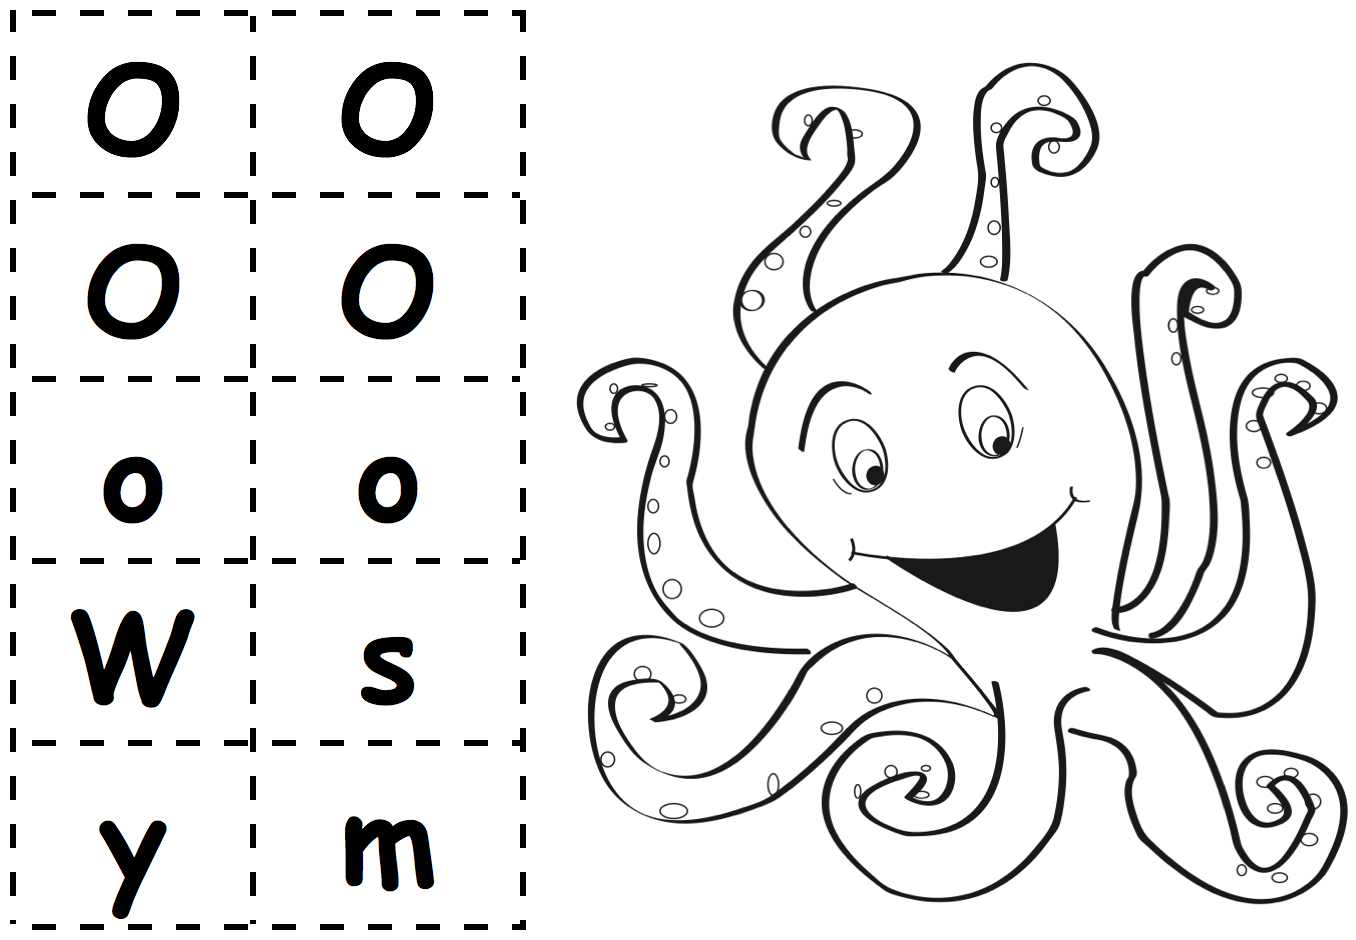 Octopus-Picture-and-Letters